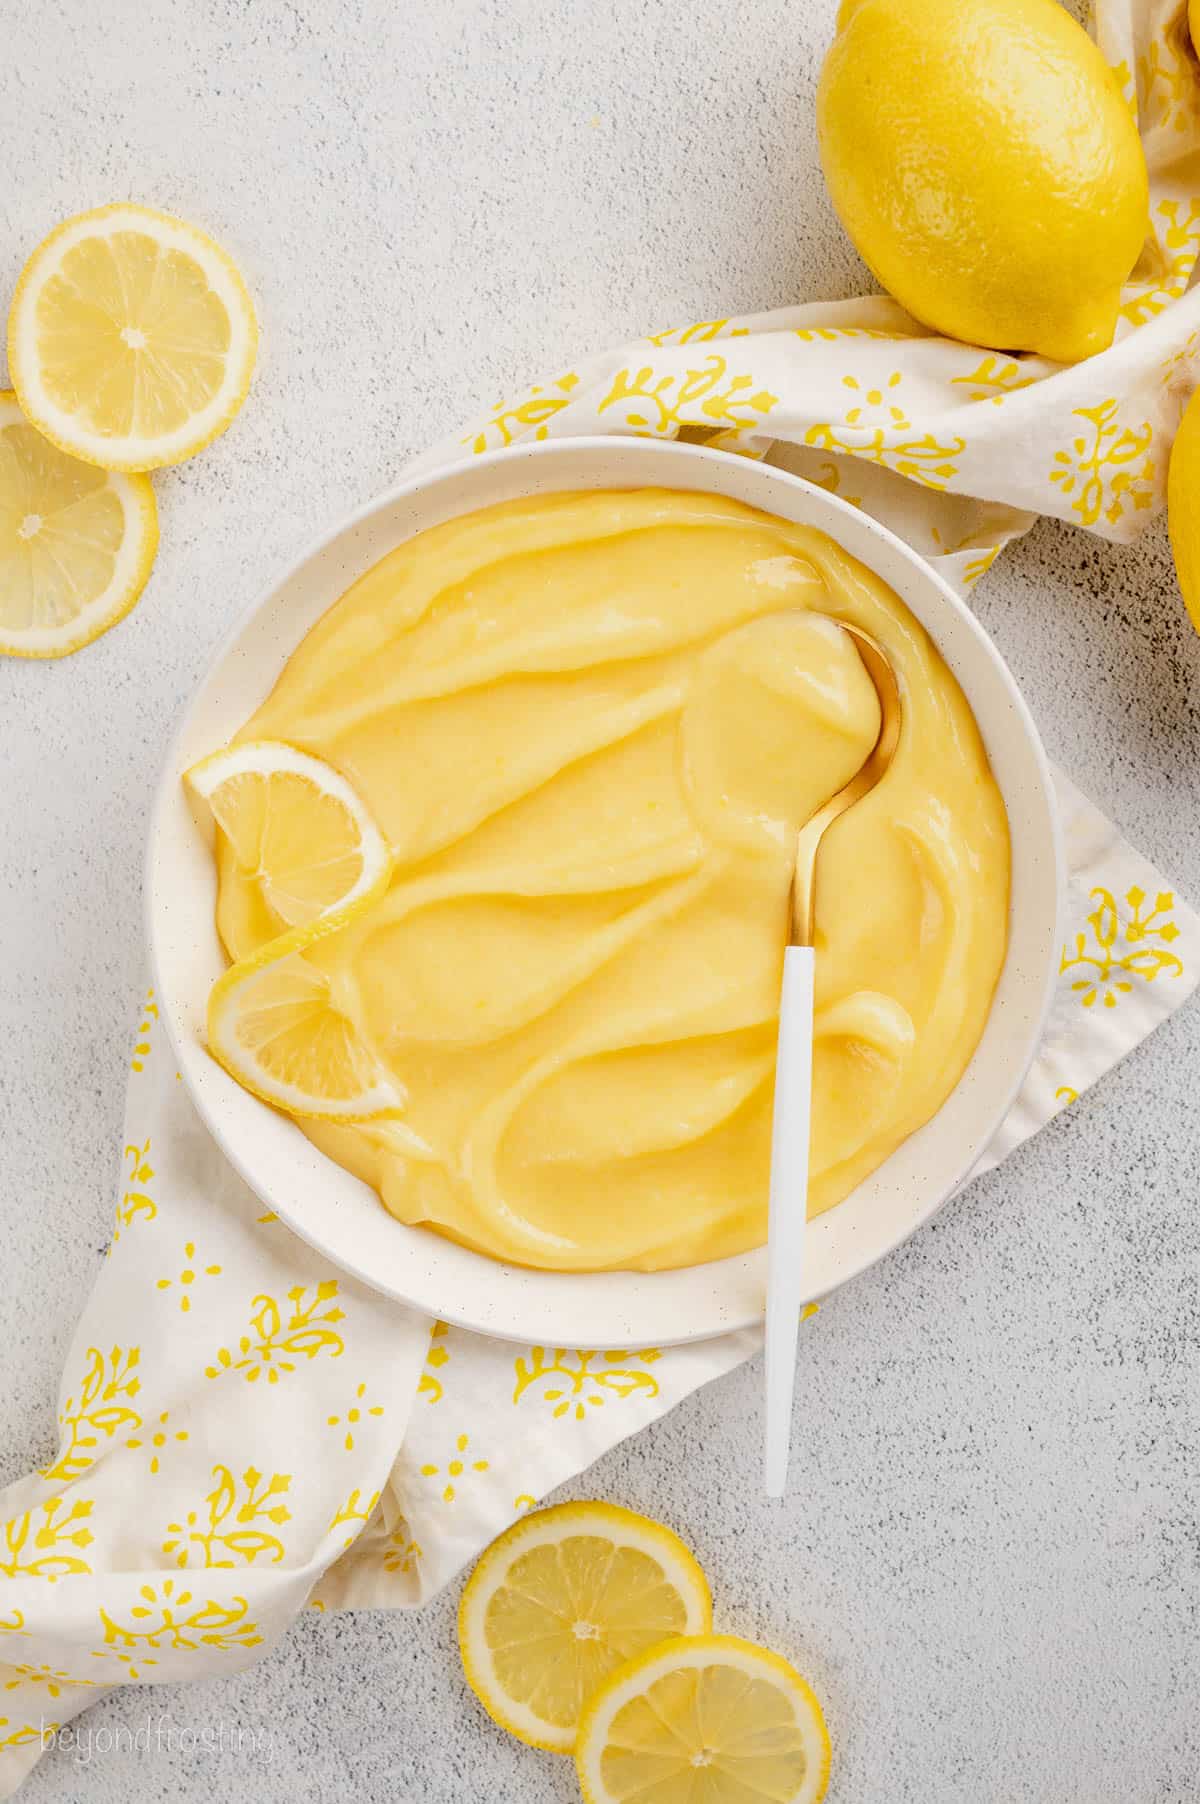 Overhead view of homemade lemon curd in a white bowl surrounded by fresh lemons.